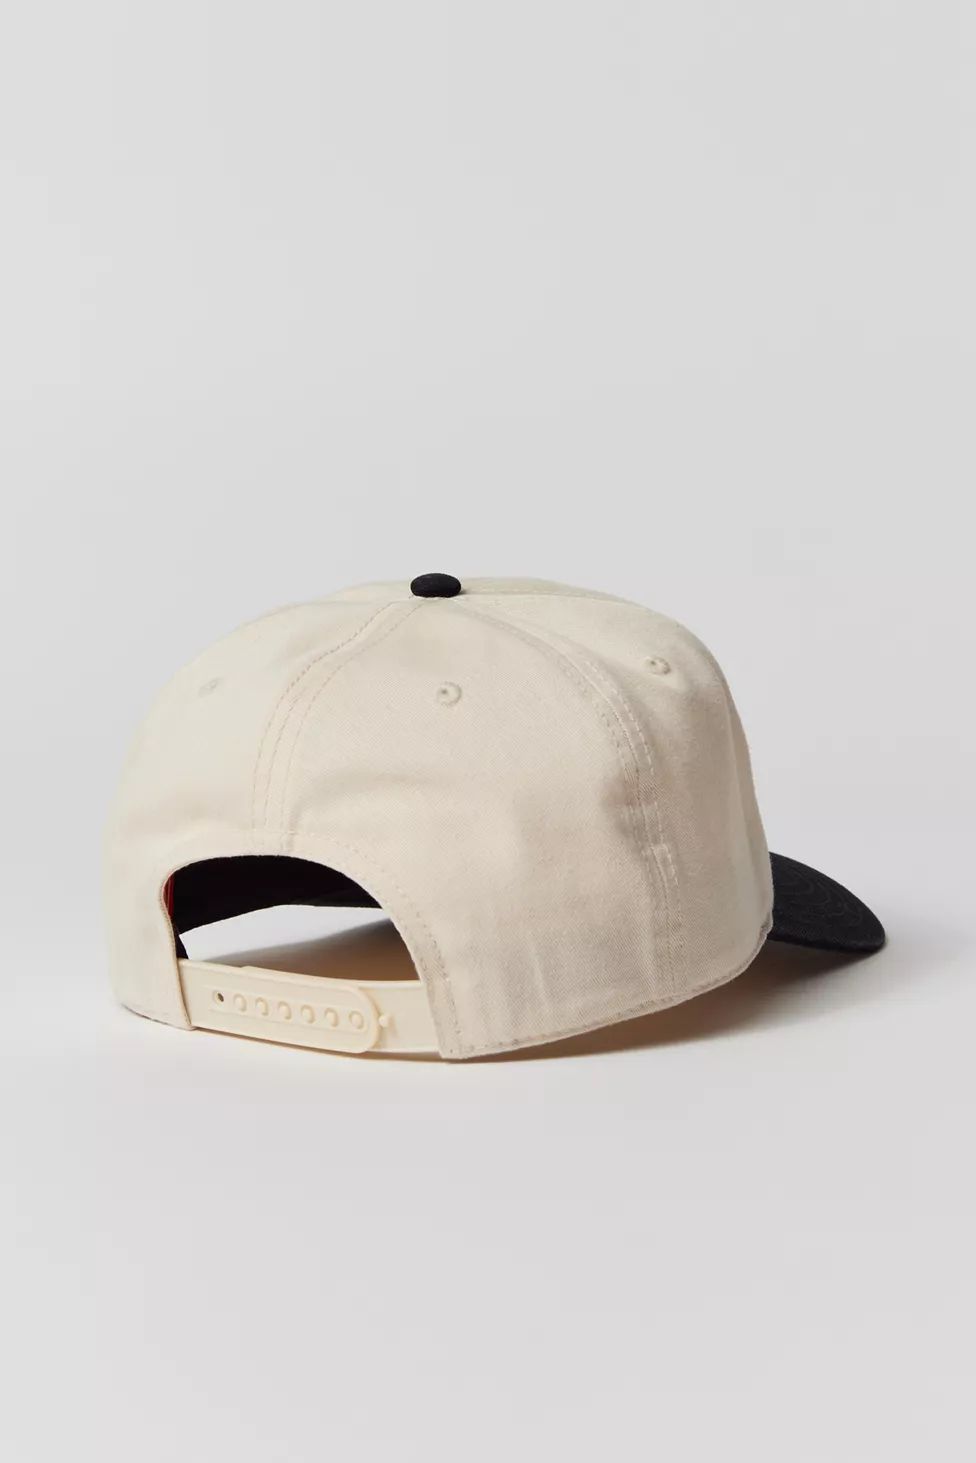 American Needle Miller Genuine Draft Racing Hat | Urban Outfitters (US and RoW)